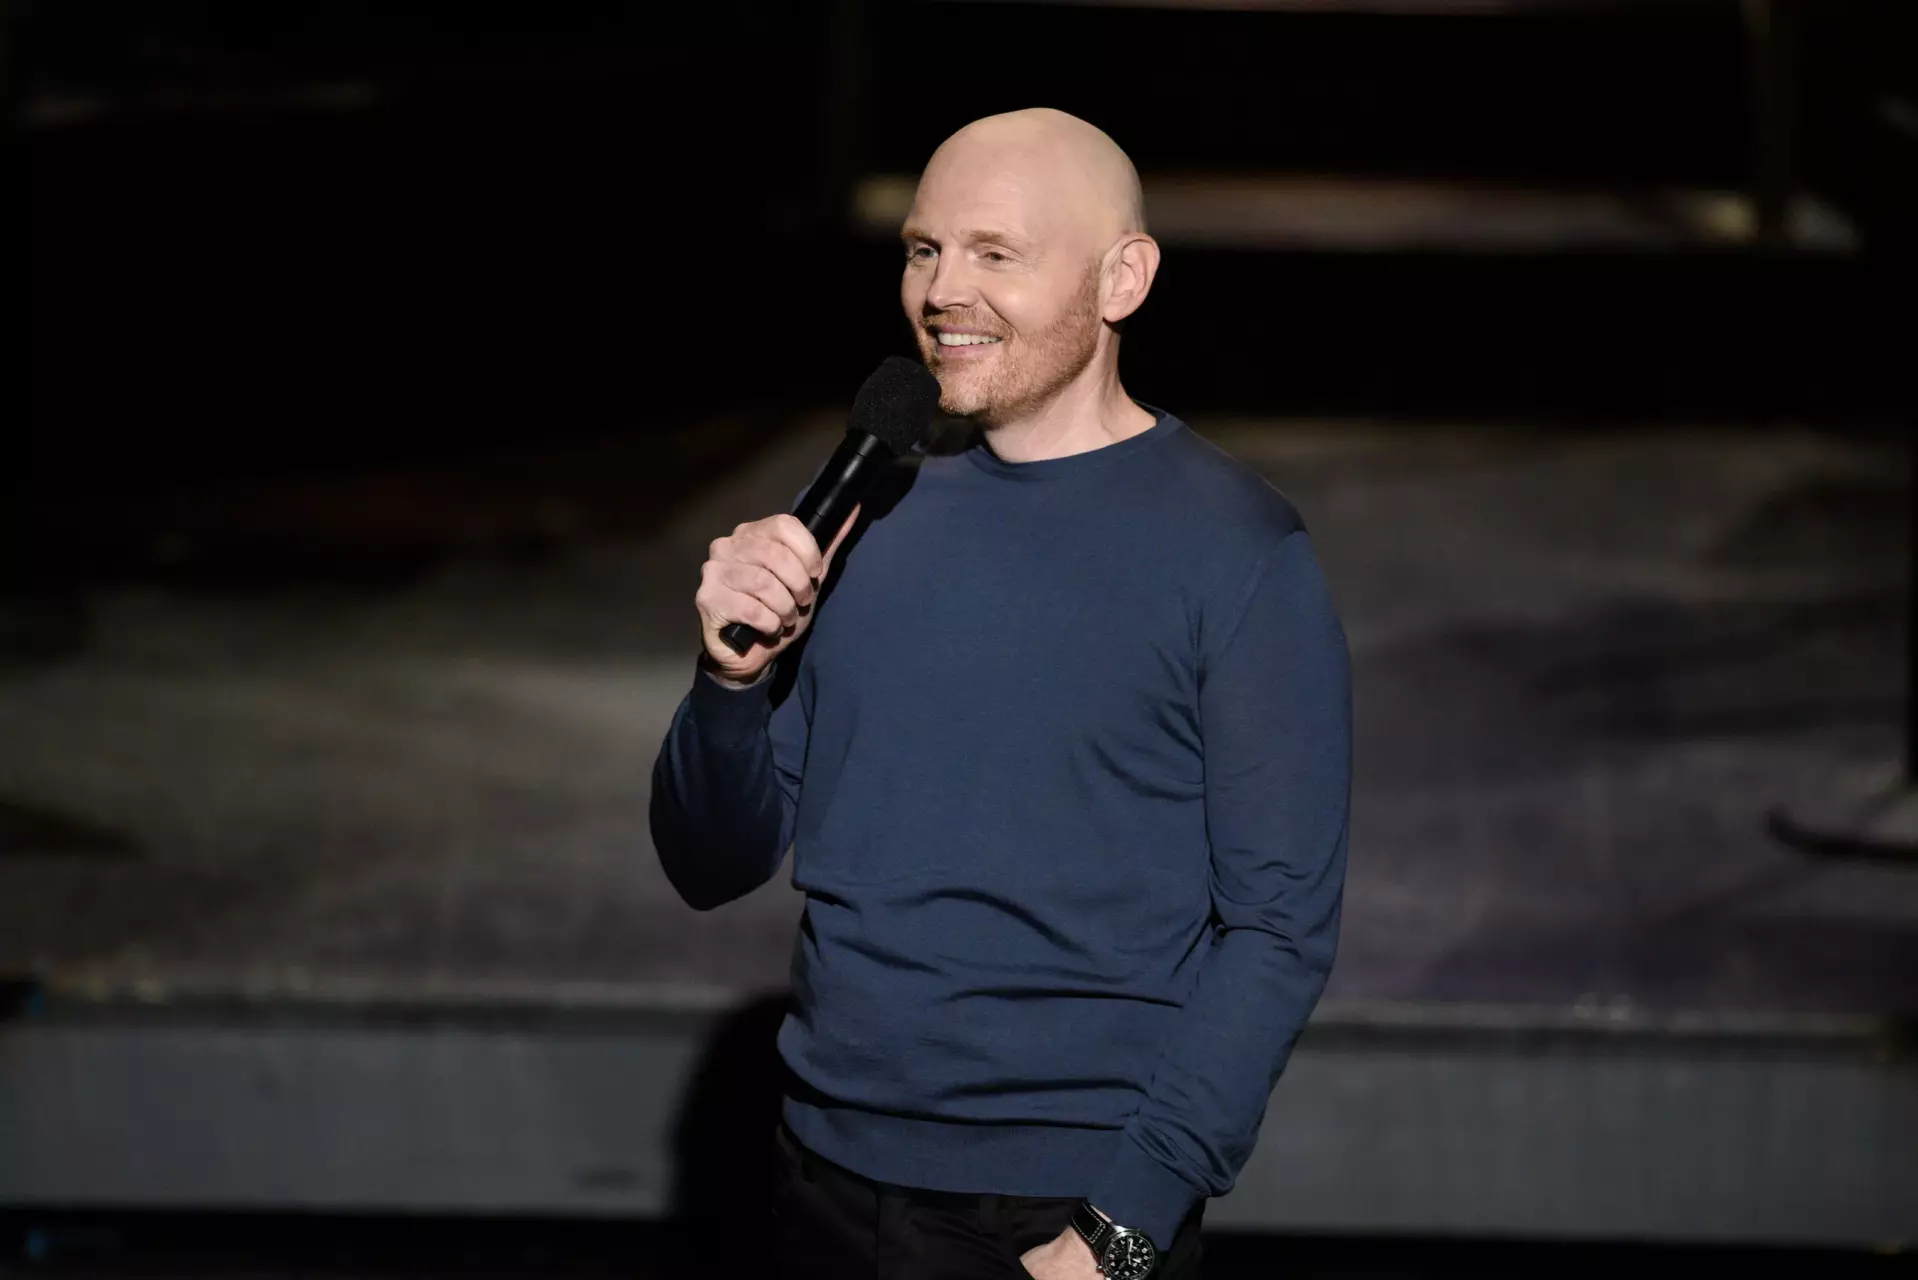 Bill Burr presently doing stand-up comedy performances